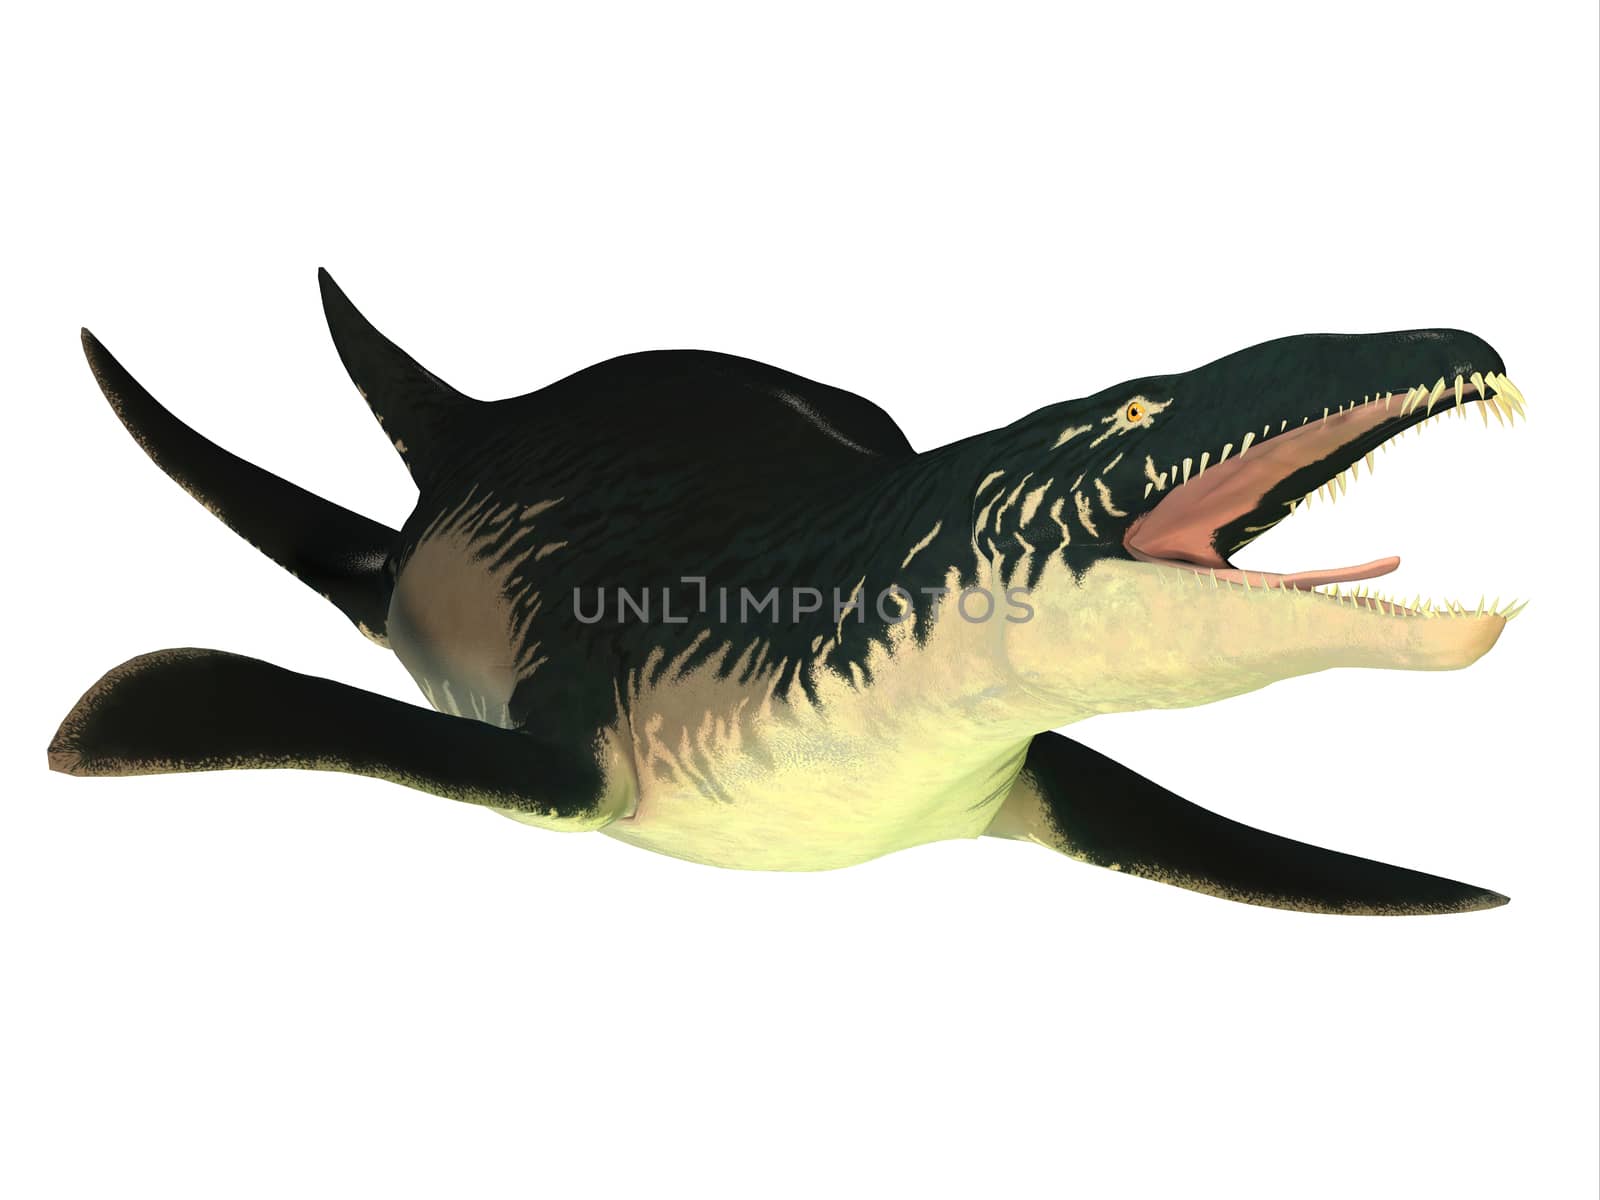 Liopleurodon was a carnivorous marine reptile that lived in Jurassic seas of France and England.